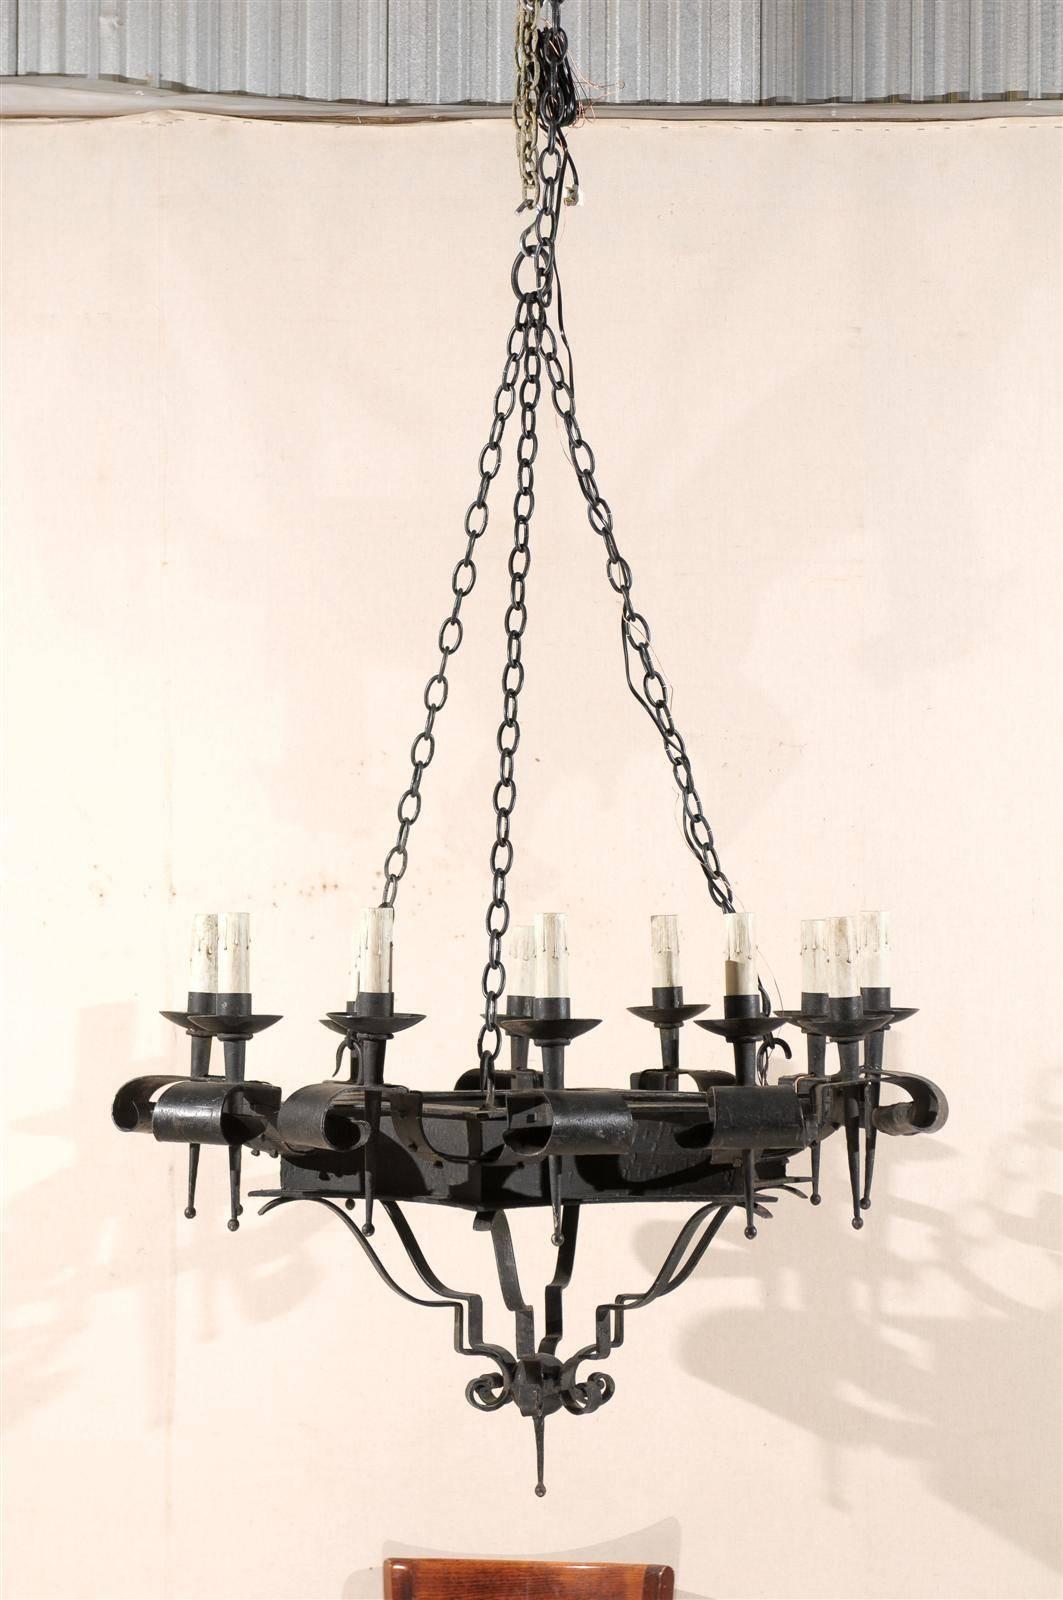 A Gorgeous Italian Antique Twelve-Light Forged-Iron Chandelier, 4.75 Ft Tall 1